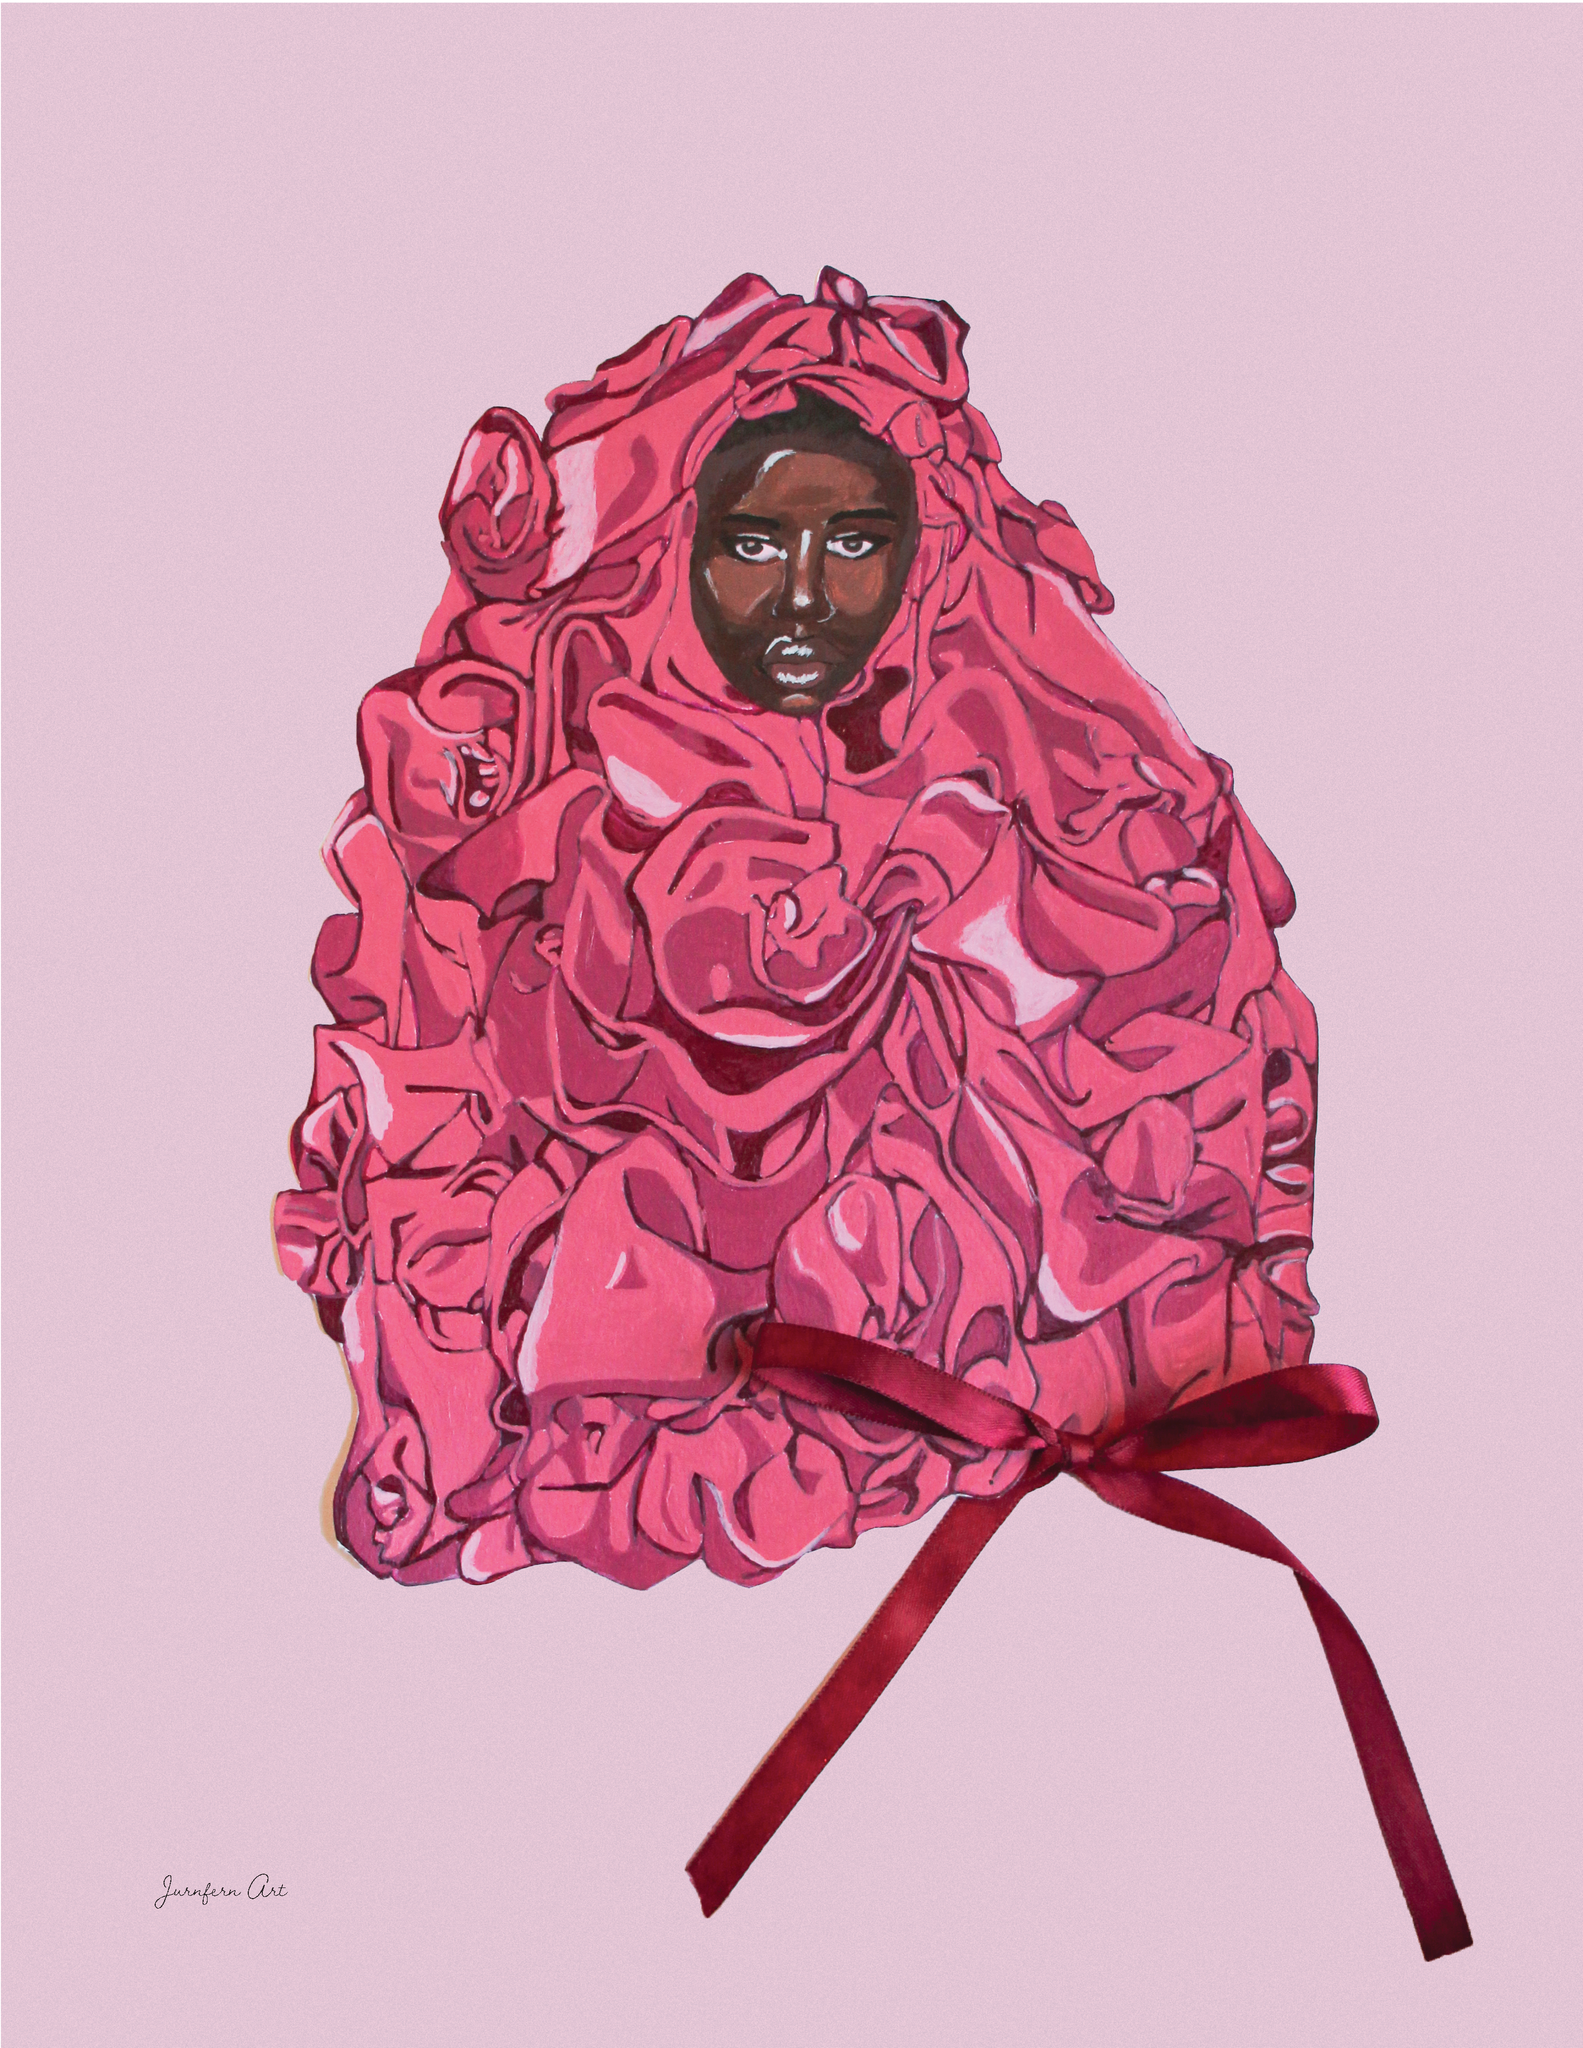 An art print with an illustration of Black supermodel Adut Akech wearing a pink Valentino gown with a bow on it, with a light pink background